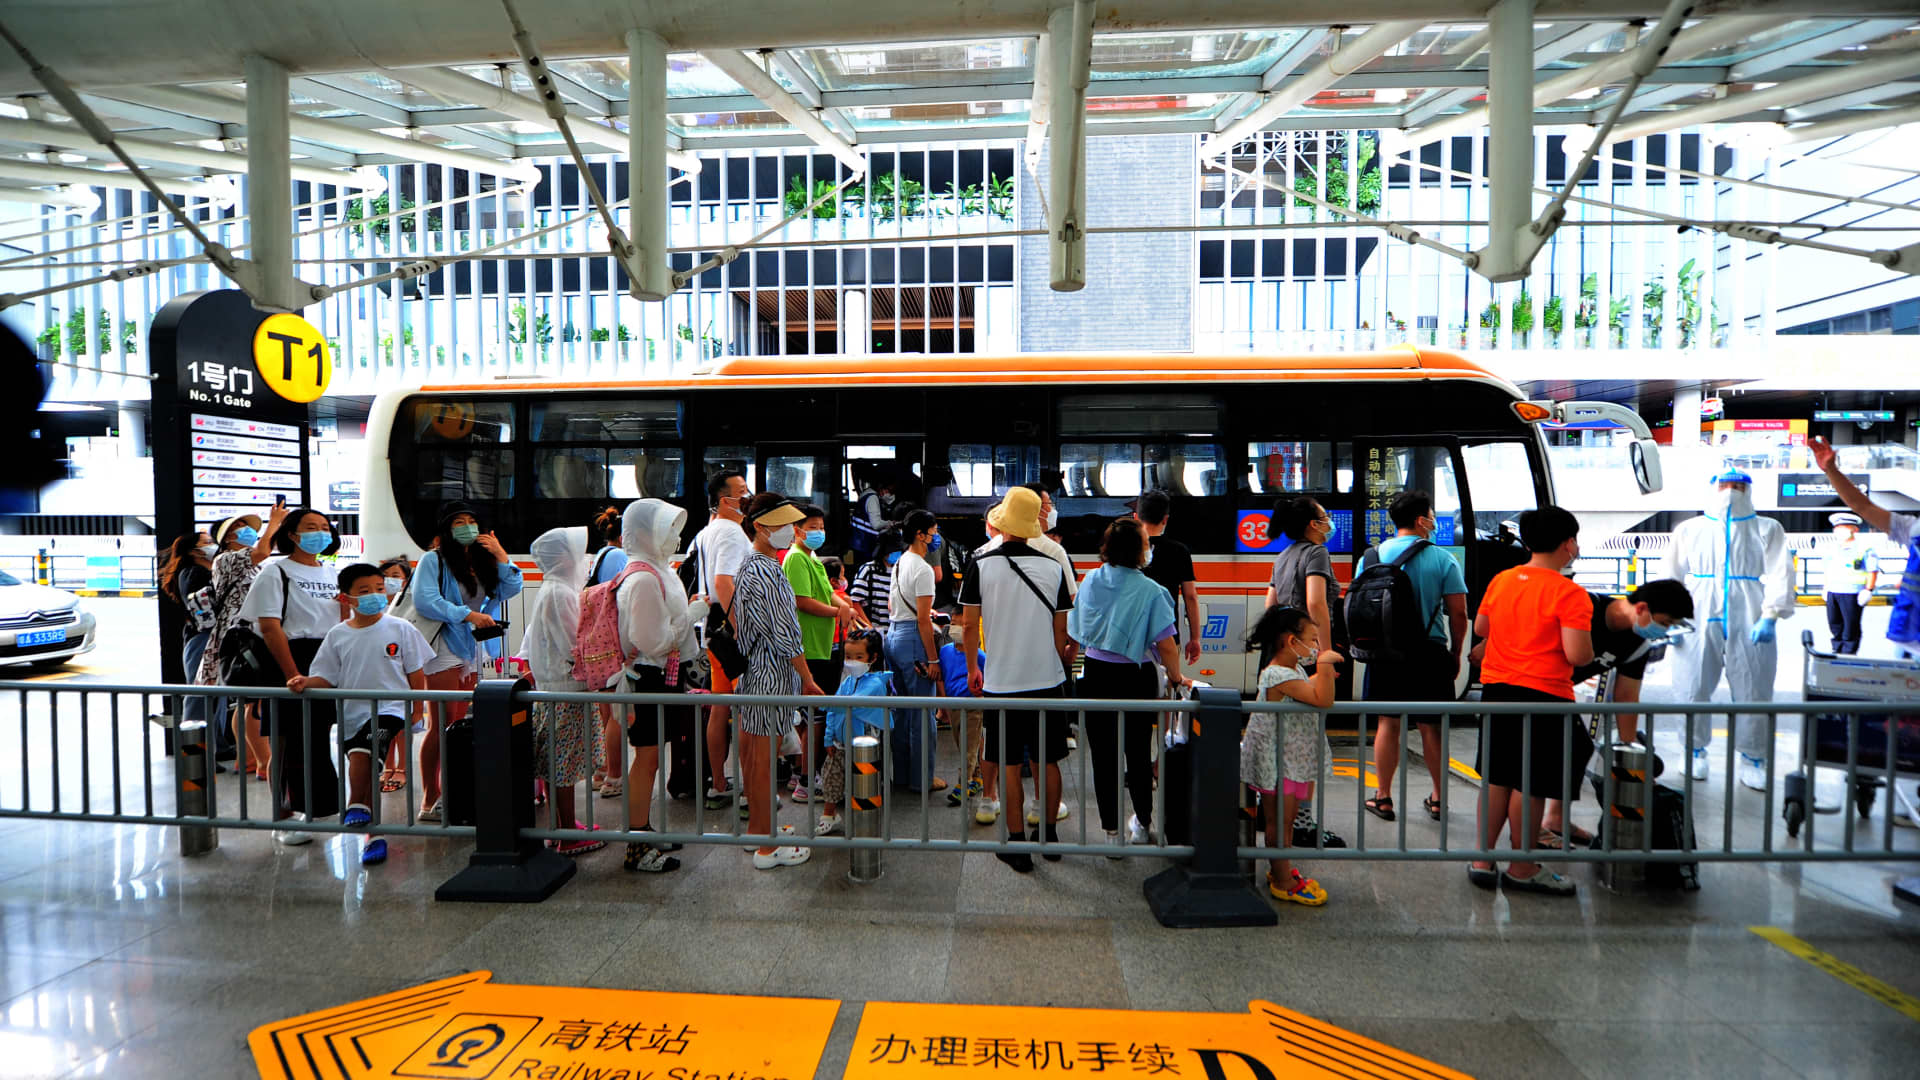 Tens of thousands of tourists were stranded in the resort city of Sanya, Hainan, this week as local Covid outbreaks prompted airlines to cancel flights.